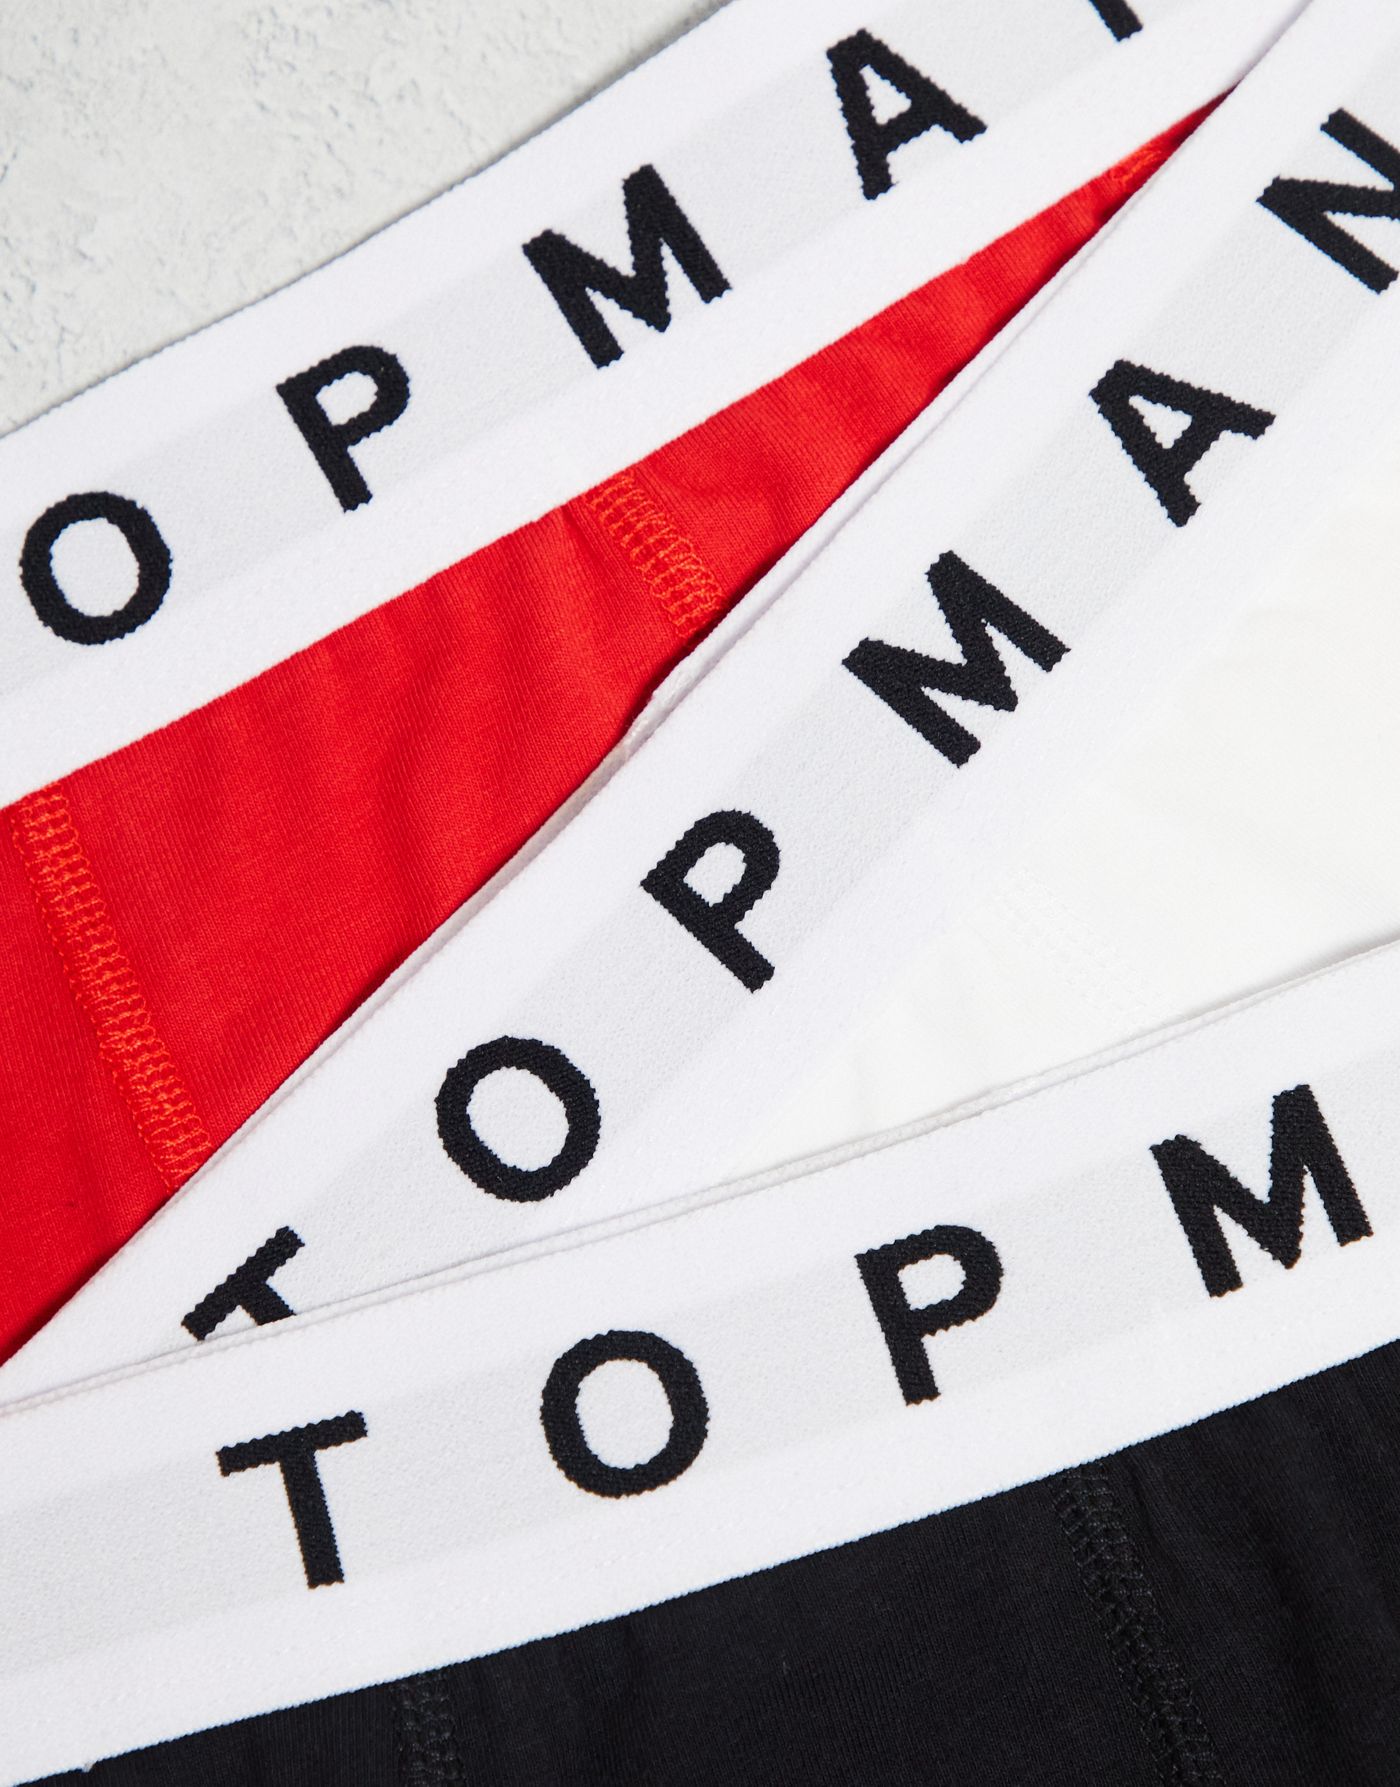 Topman 3 pack trunks in black, white and red